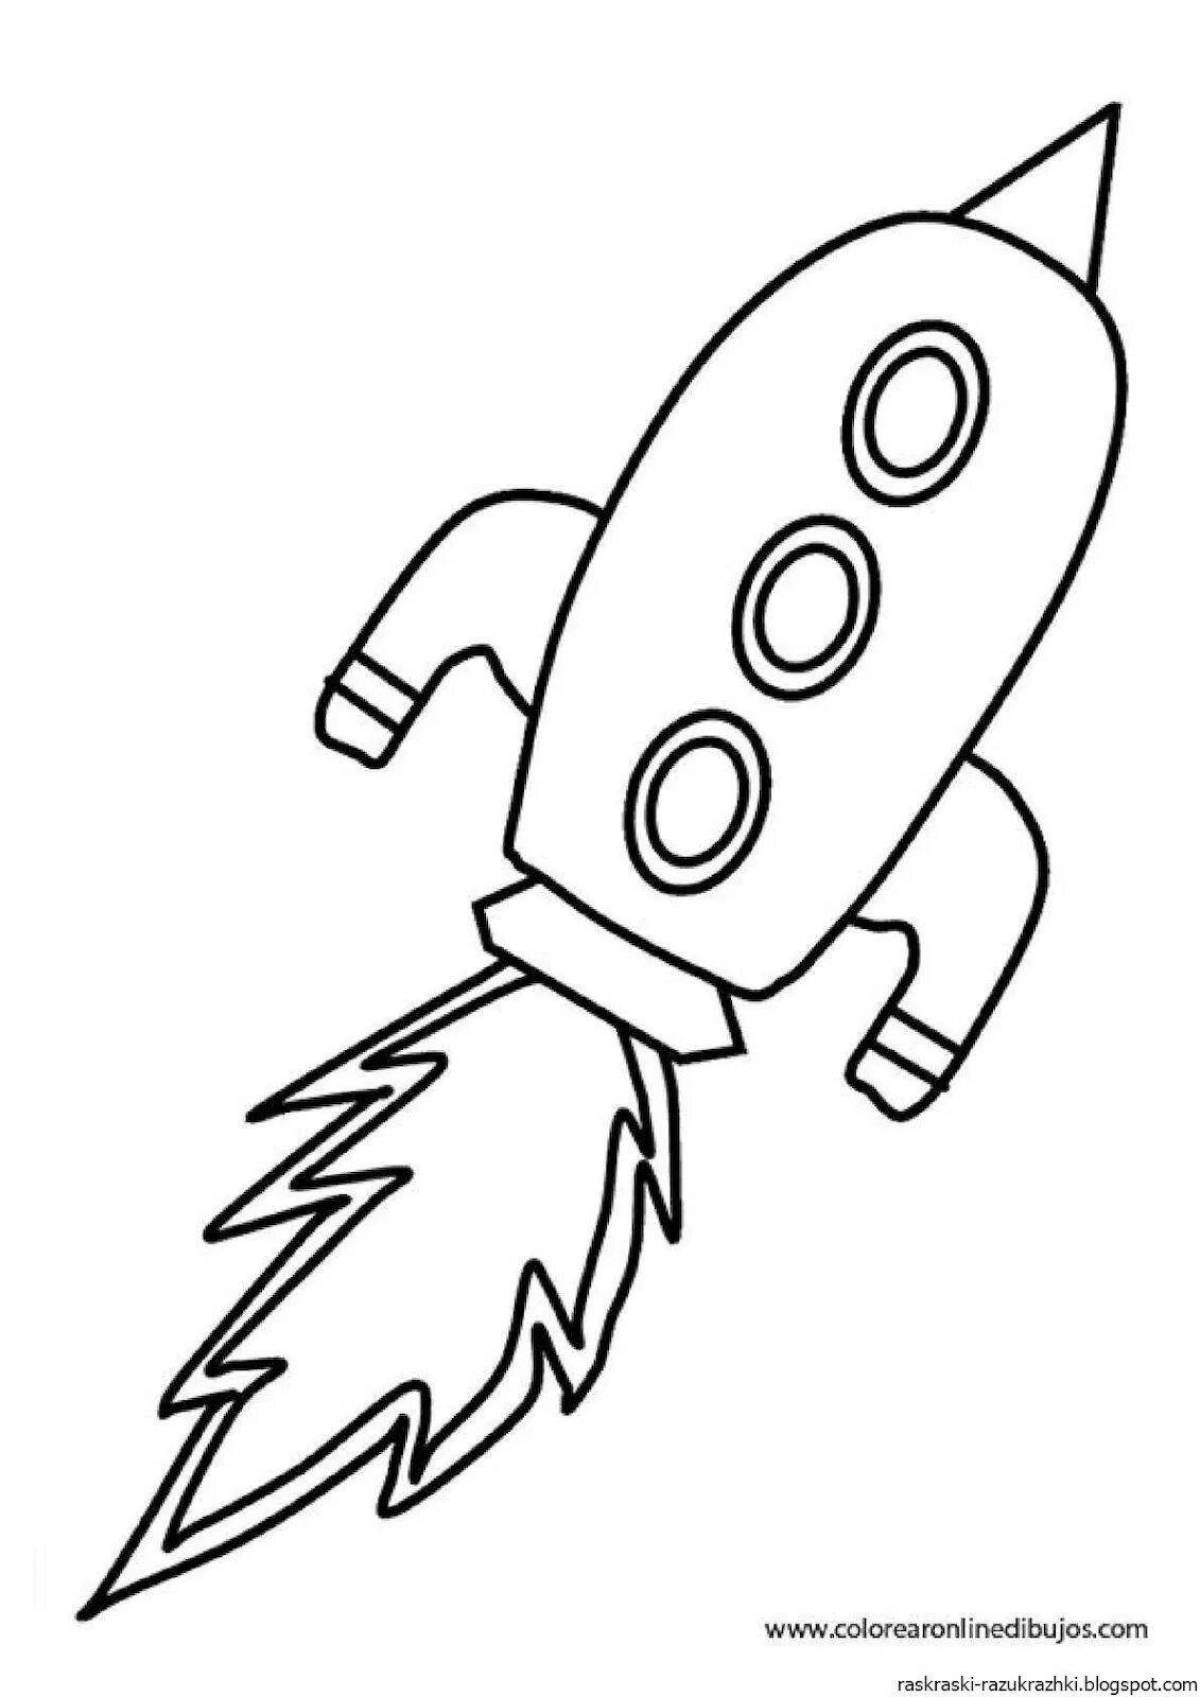 Creative rocket coloring book for kids